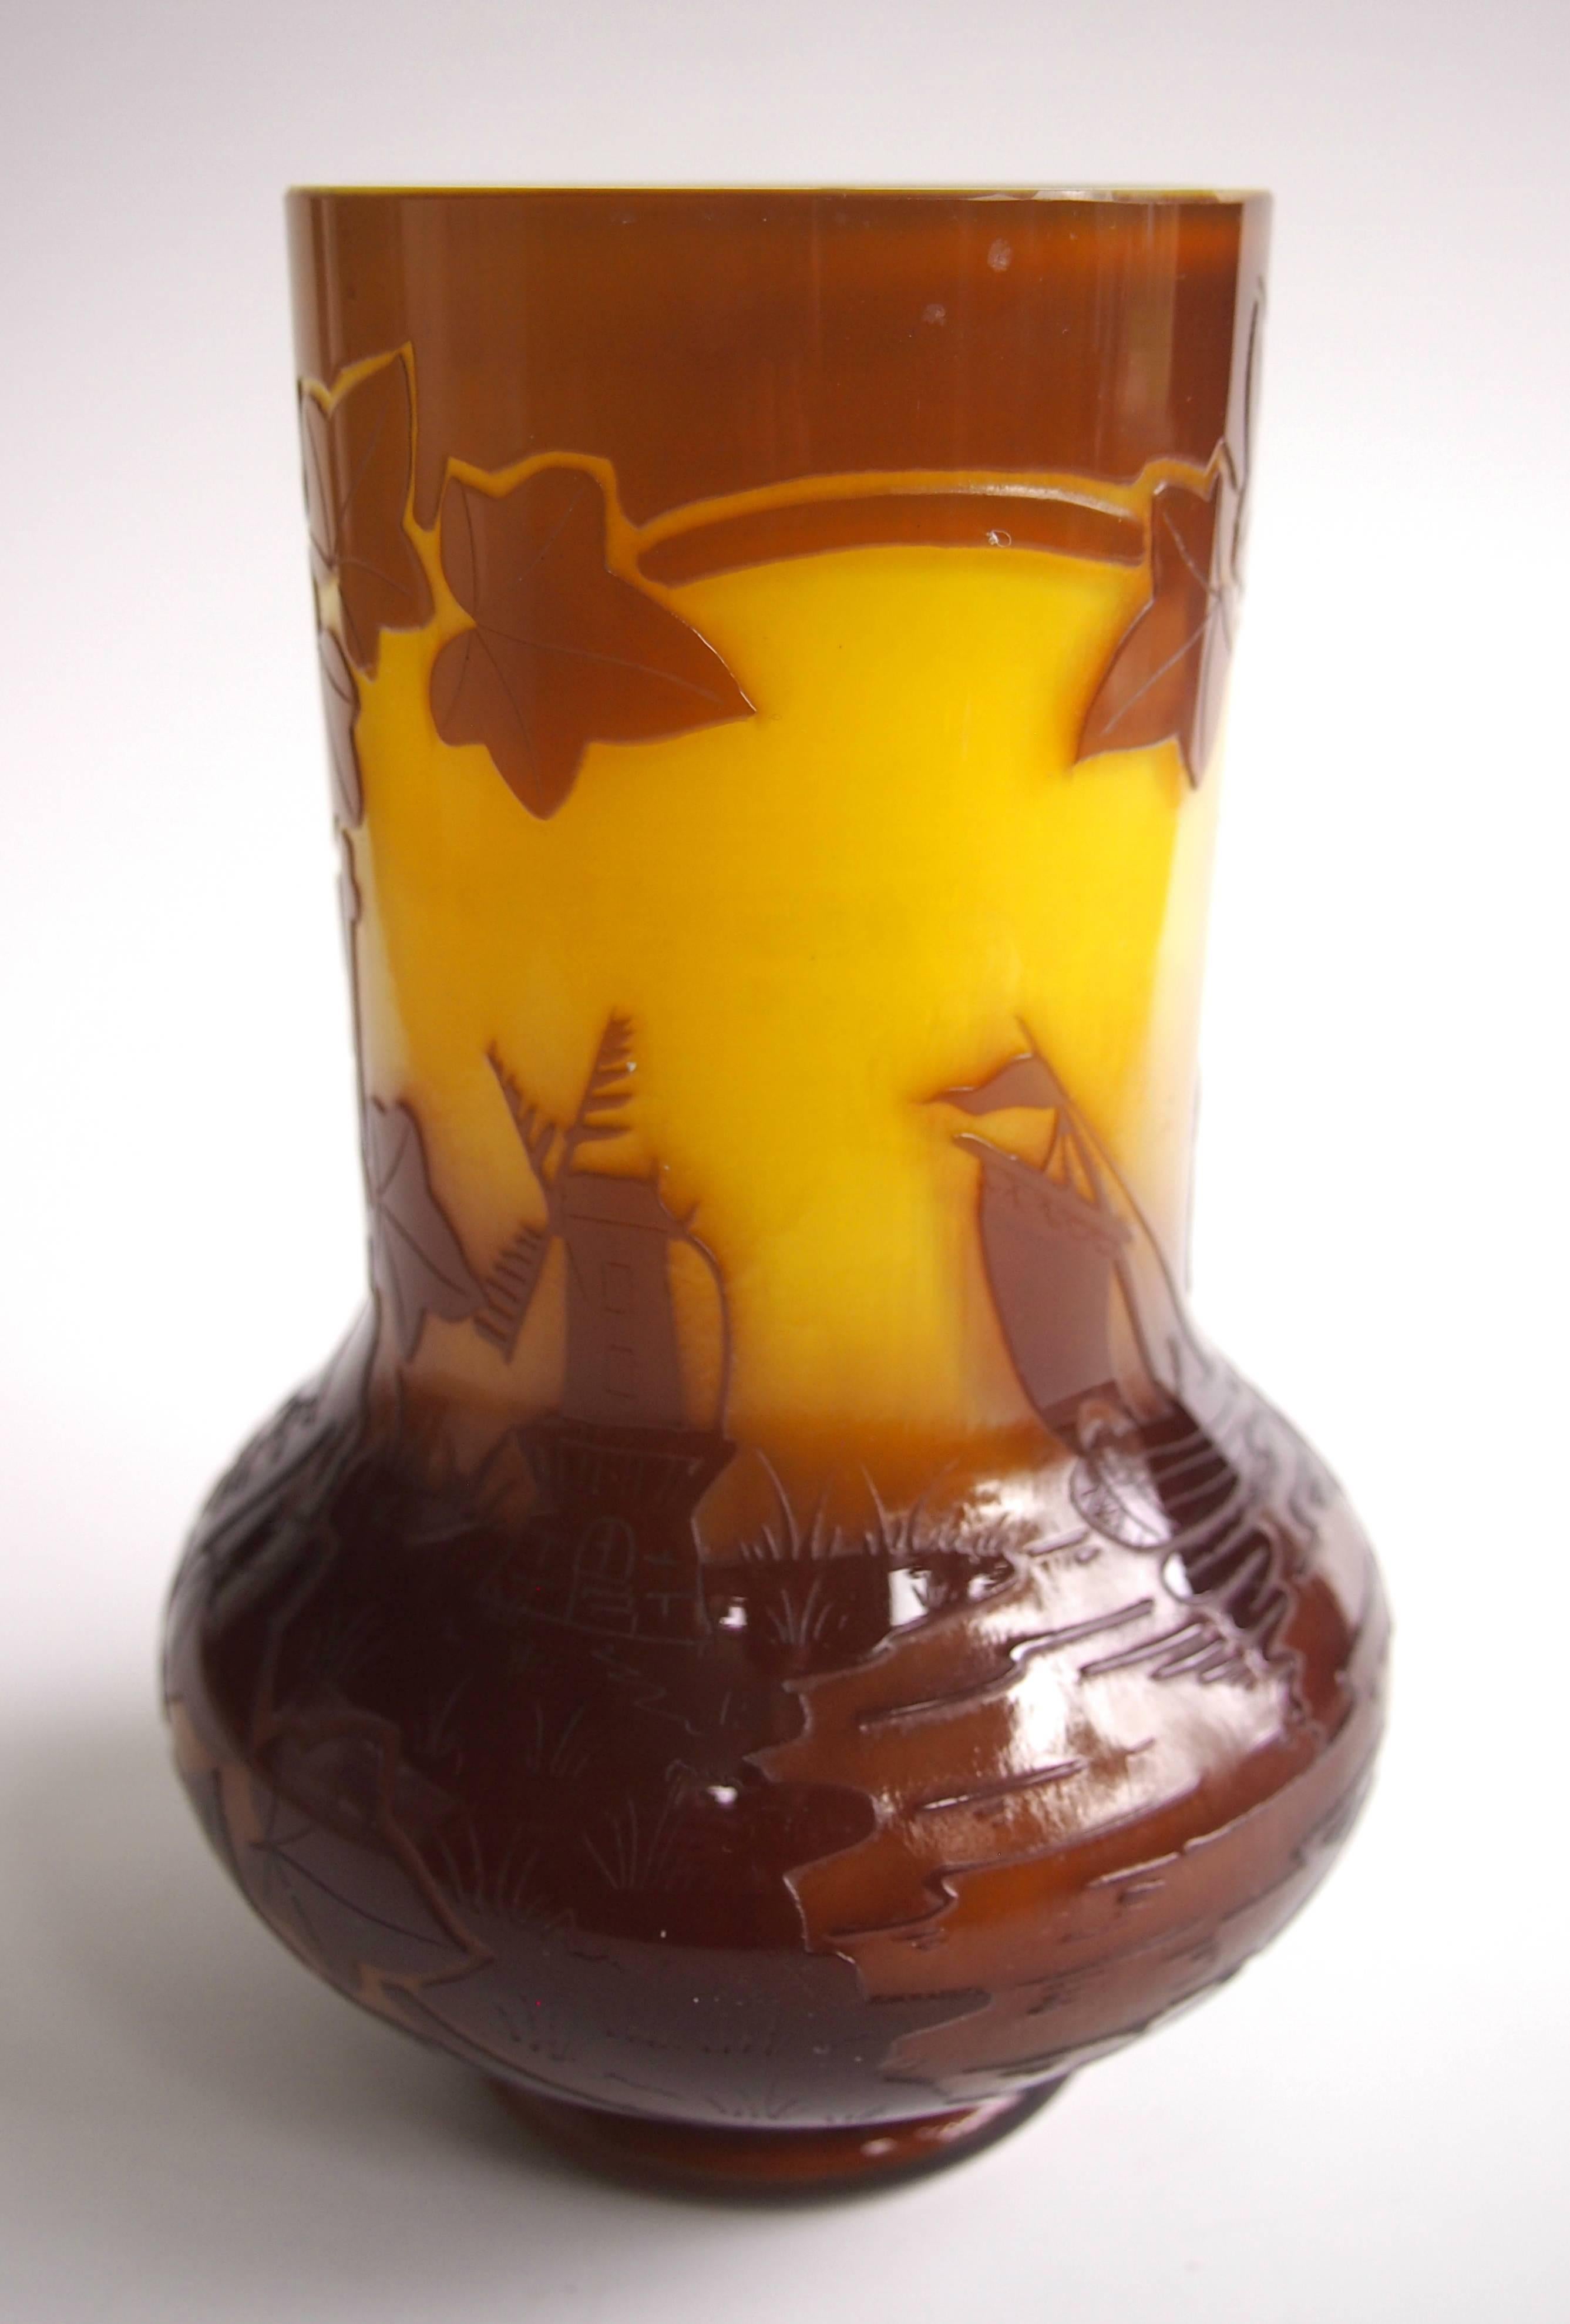 Impressive Art Nouveau signed Fritz Heckert cameo vase in brown over yellow depicting ivy leaves, a windmill and a sailing ship. Designed by Otto Thamm - Fritz's Son-in-law and at the time managing director of the company. (Signed Heckert see image